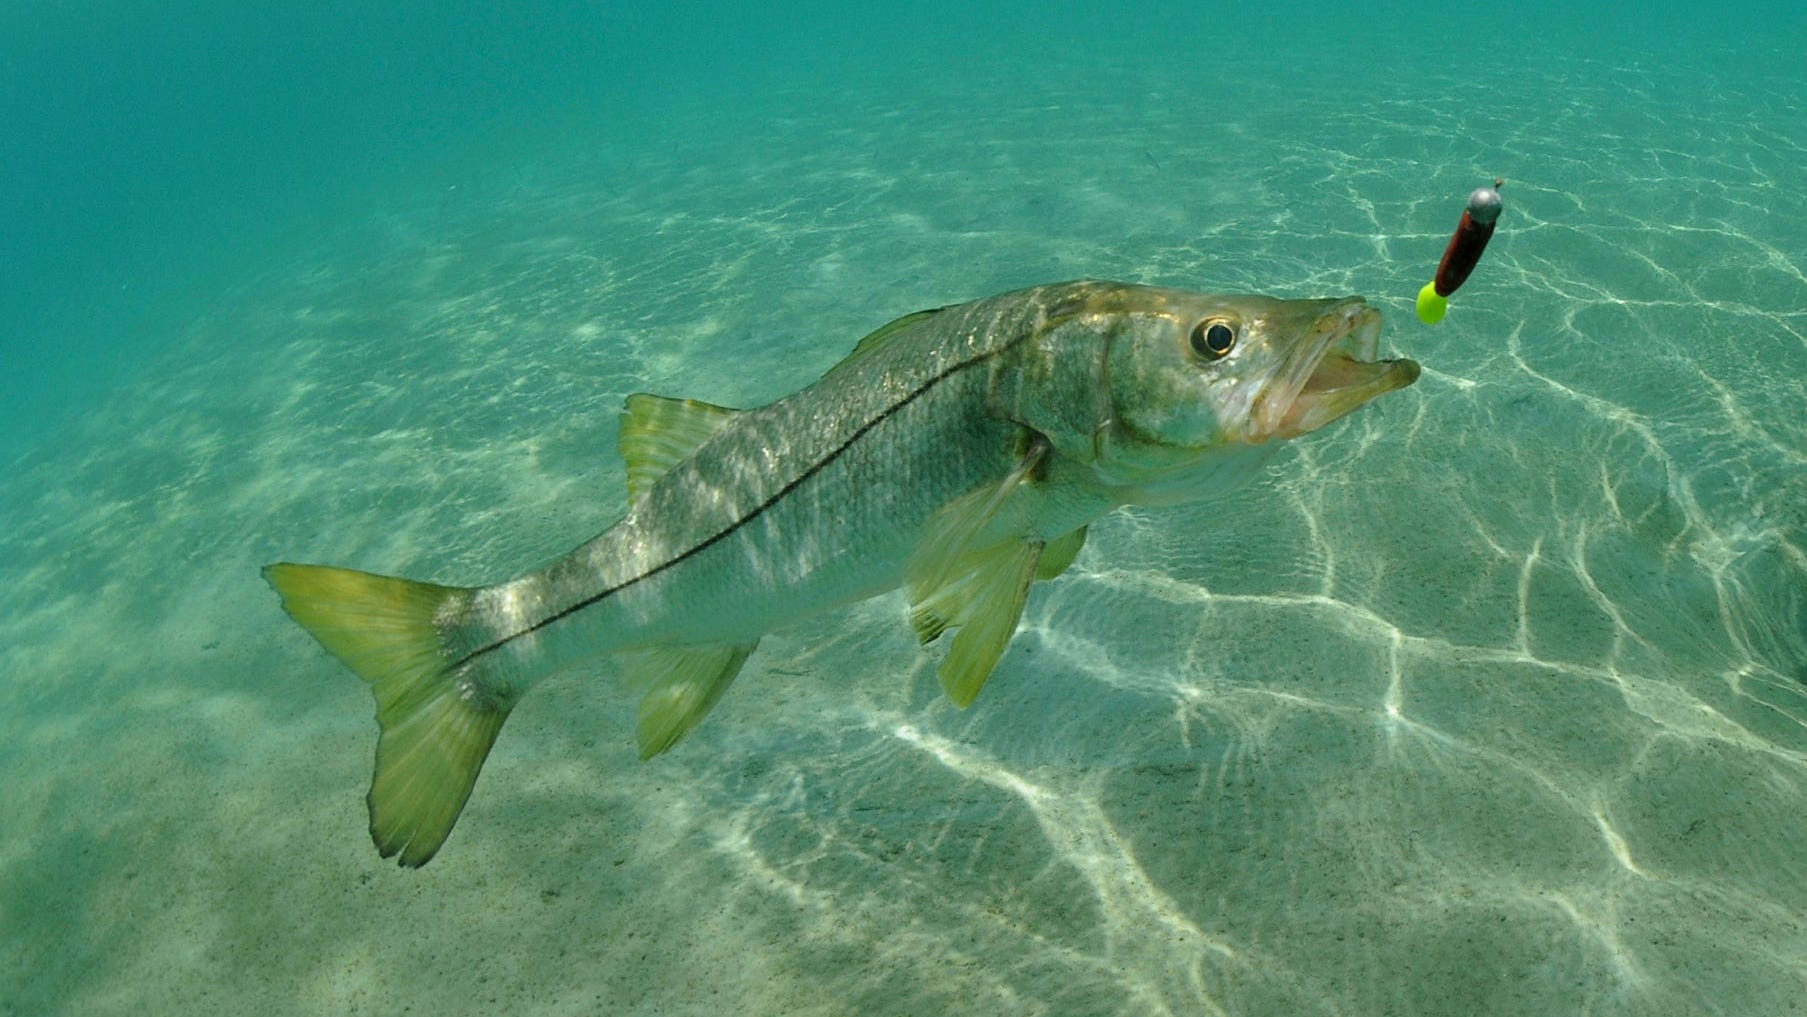 Snook season opened Sept. 1, review the measurement guidelines